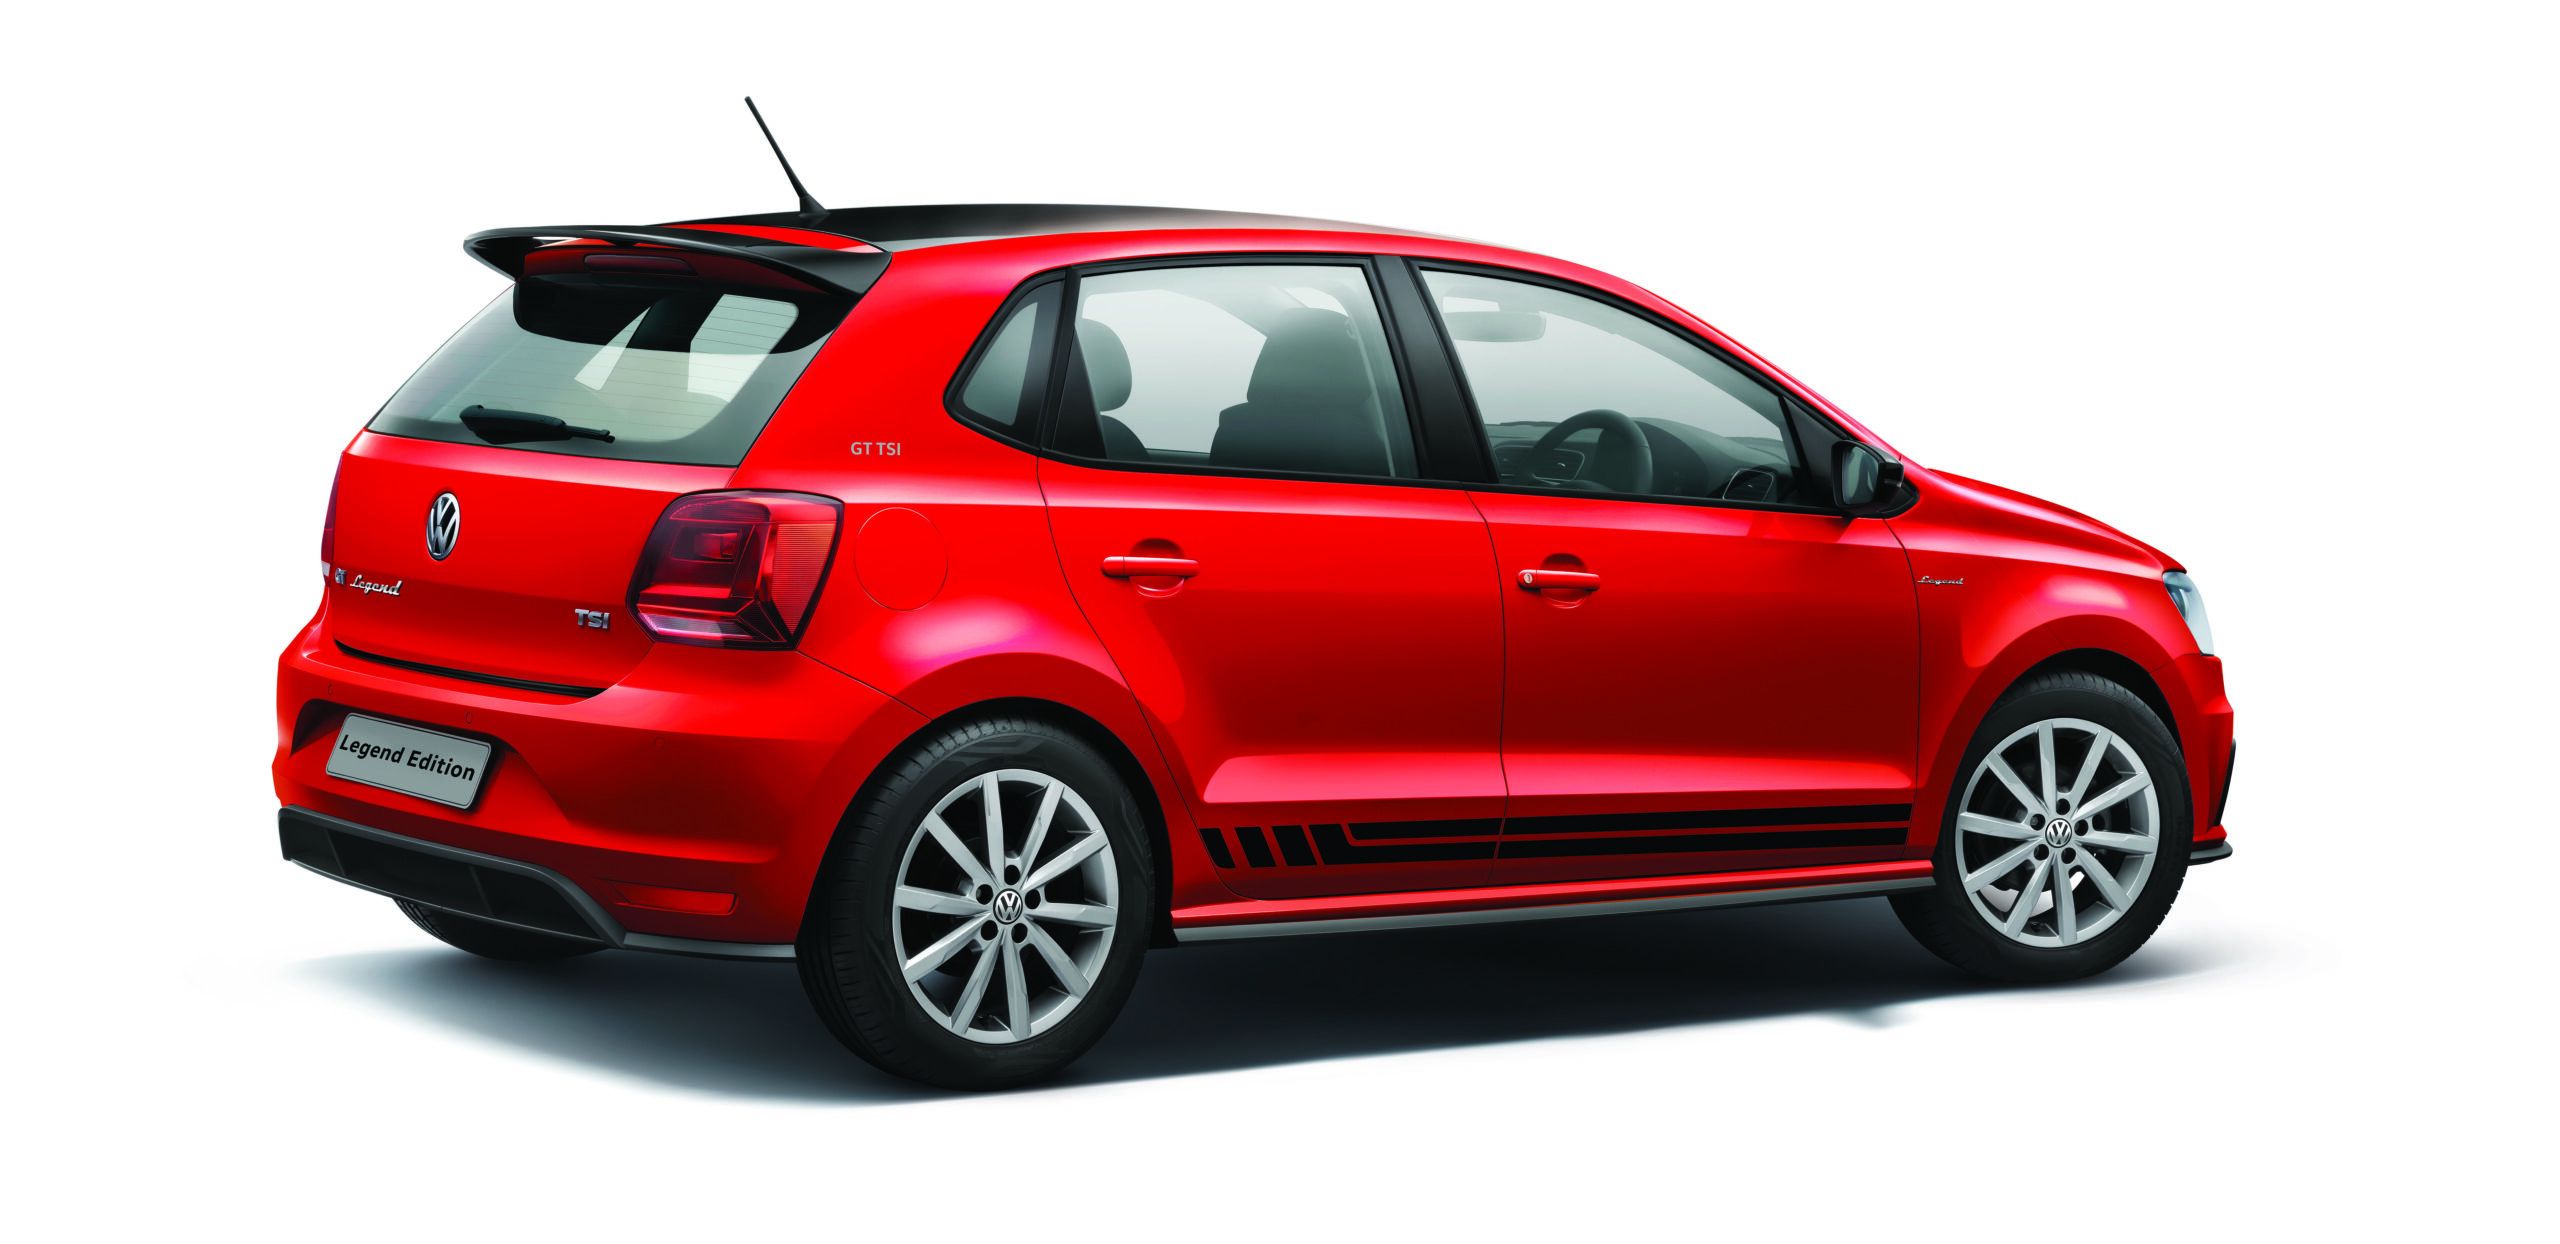 Volkswagen Polo Legend Edition Is Celebrating The Last Few Variants (2)